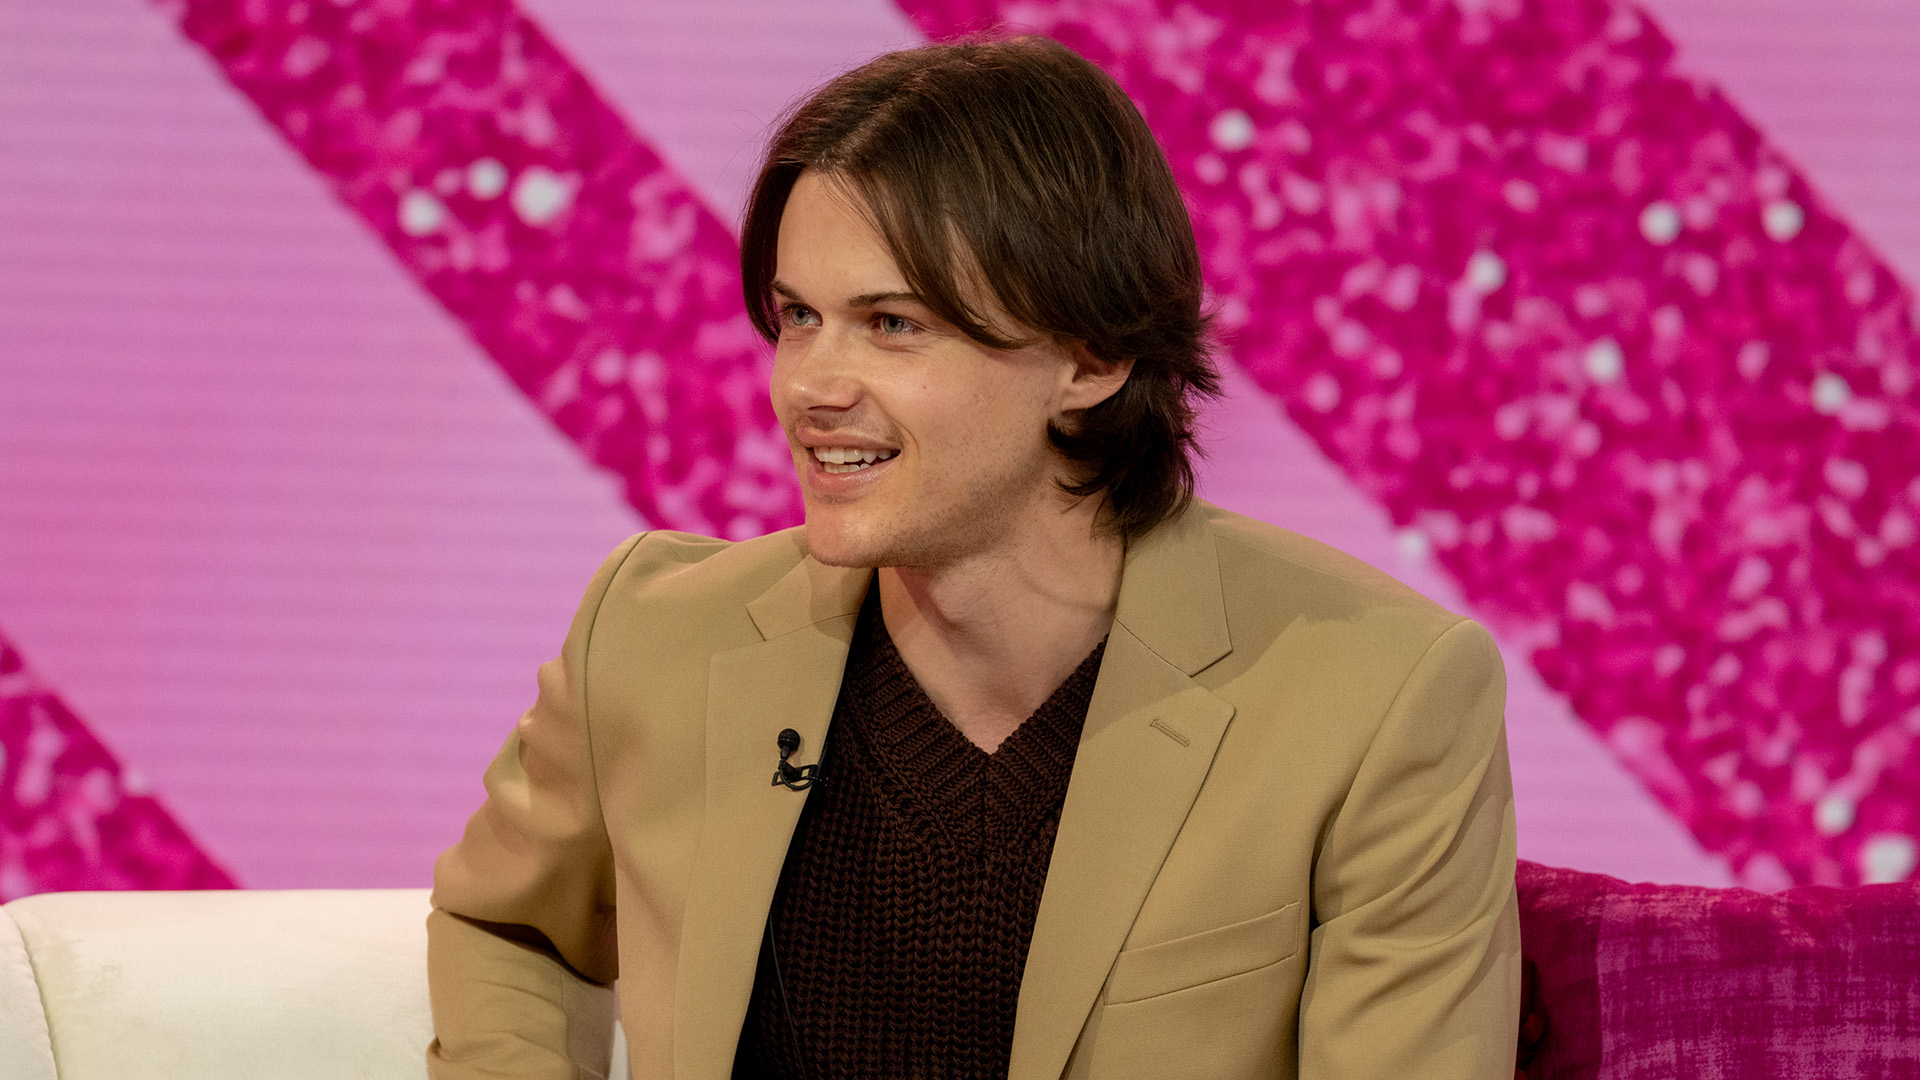 Christopher Briney reveals he almost didn't audition for 'Mean Girls'